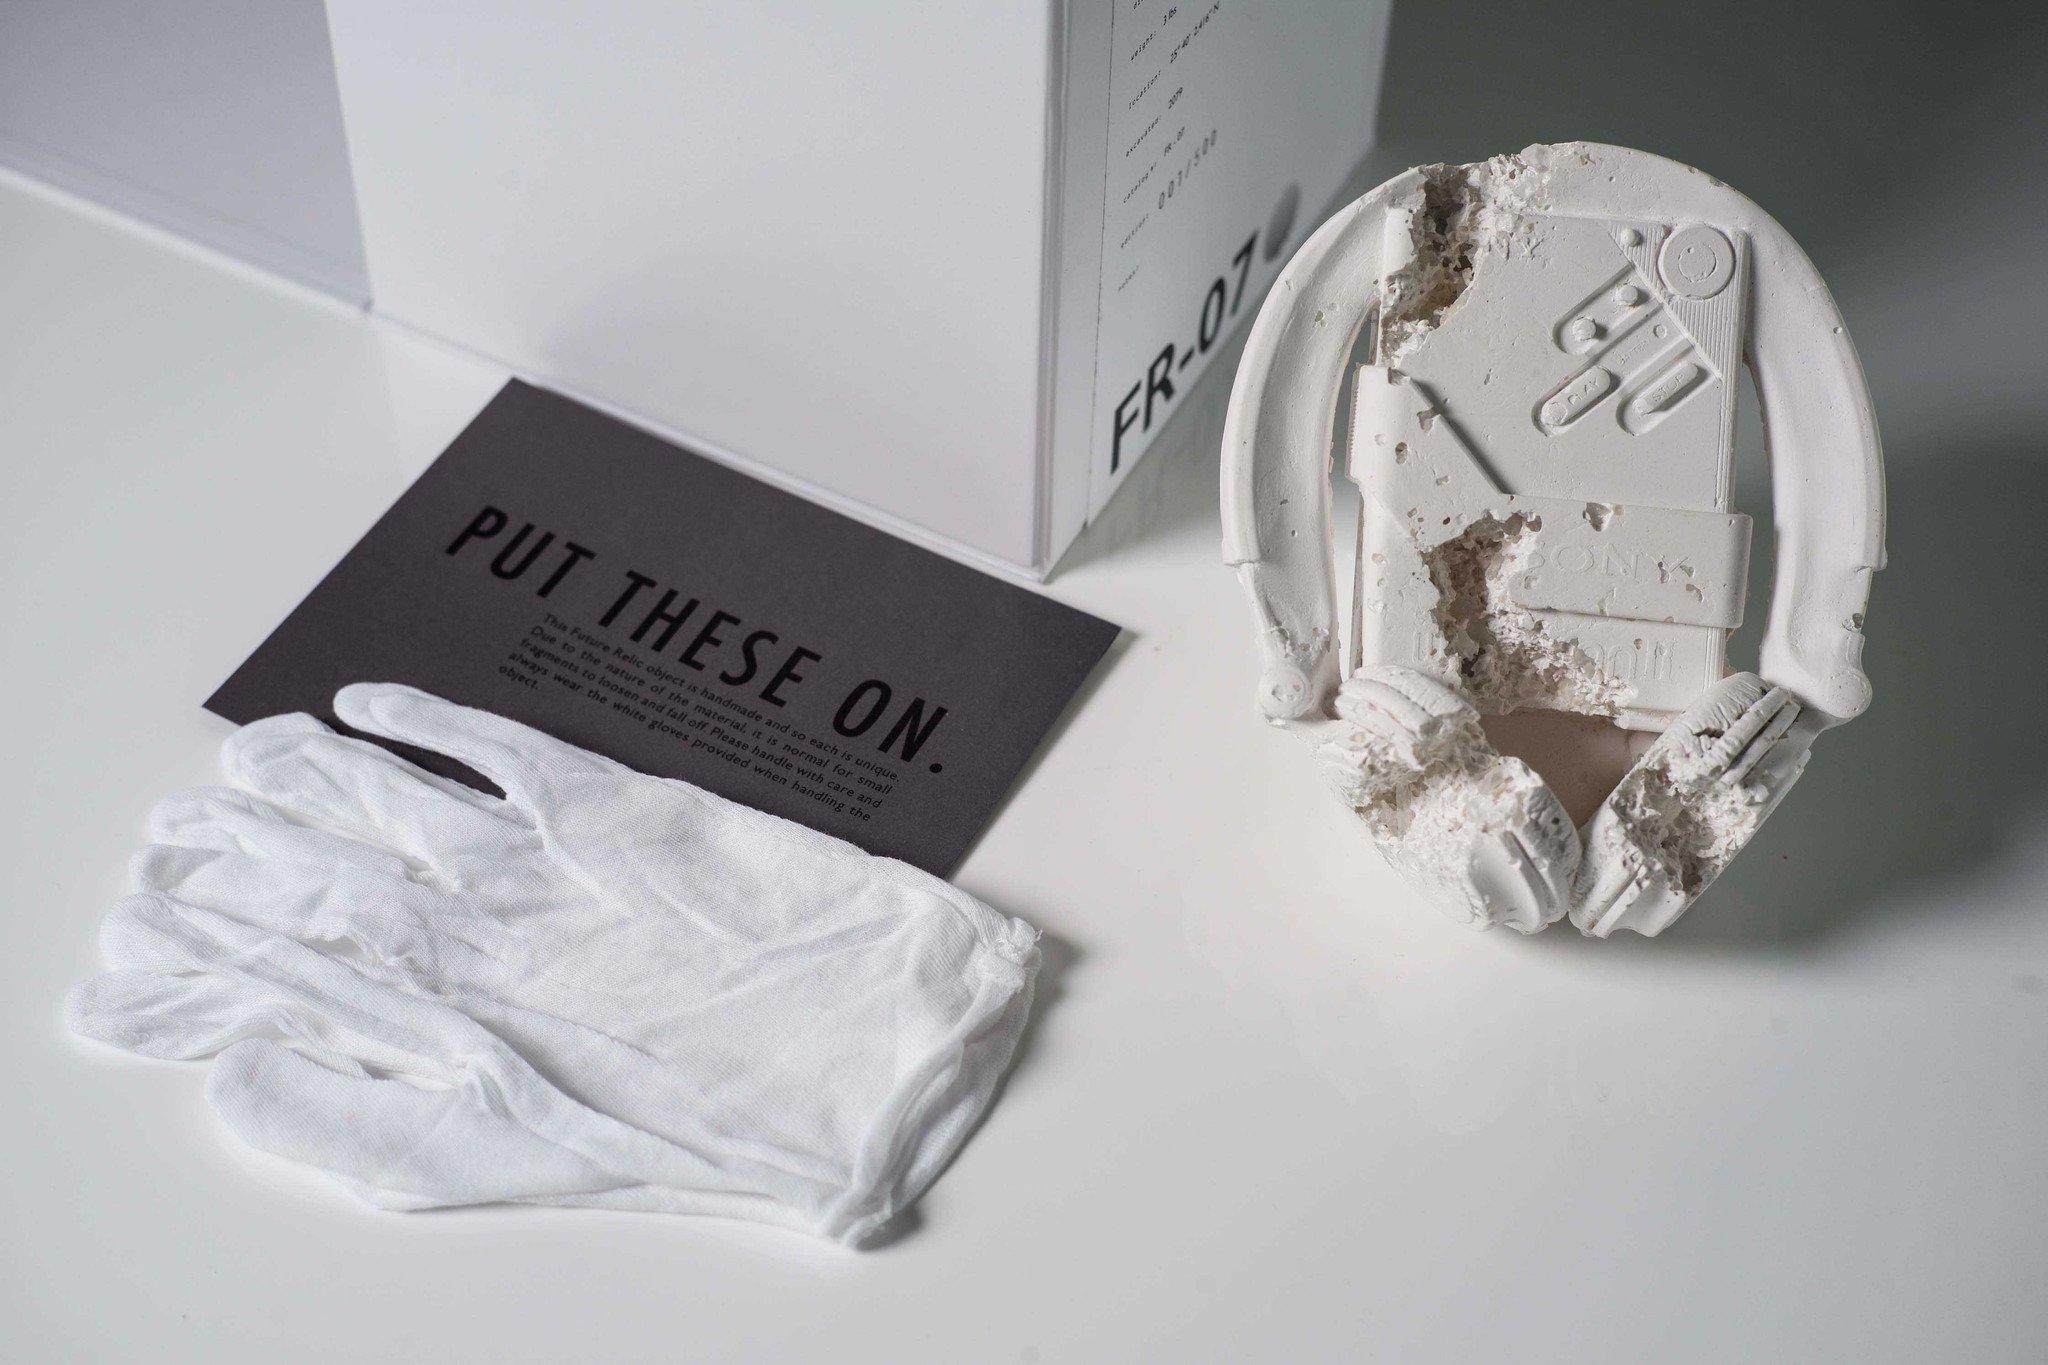 Daniel Arsham - FUTURE RELIC 07 - CASSETTE PLAYER

Date of creation: 2017
Medium: Plaster and crushed glass
Edition number: 476/500
Size: 12.7 × 14.6 × 14 cm
Condition: In mint conditions, inside its original package. Never displayed, the box has